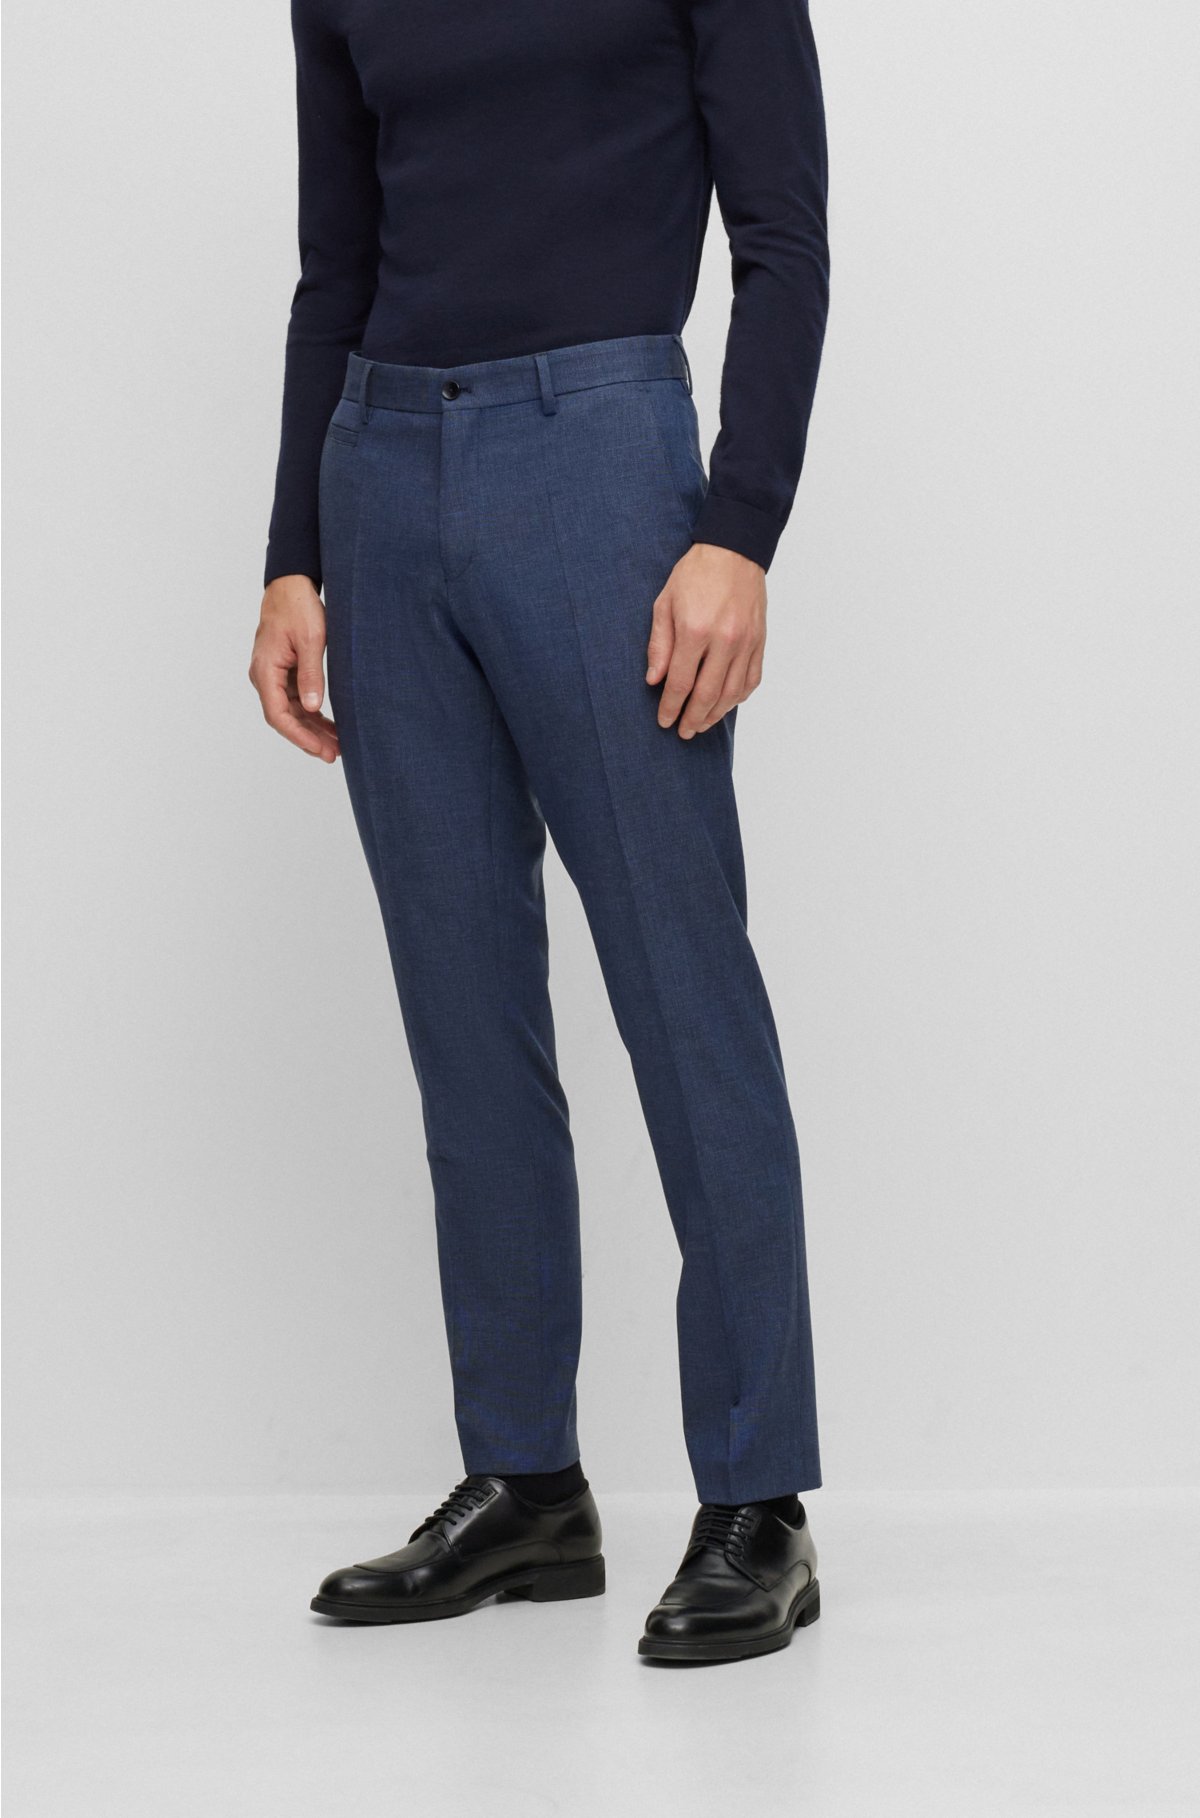 Ankle-length pants with turn-up of lux stretch cotton gabardine